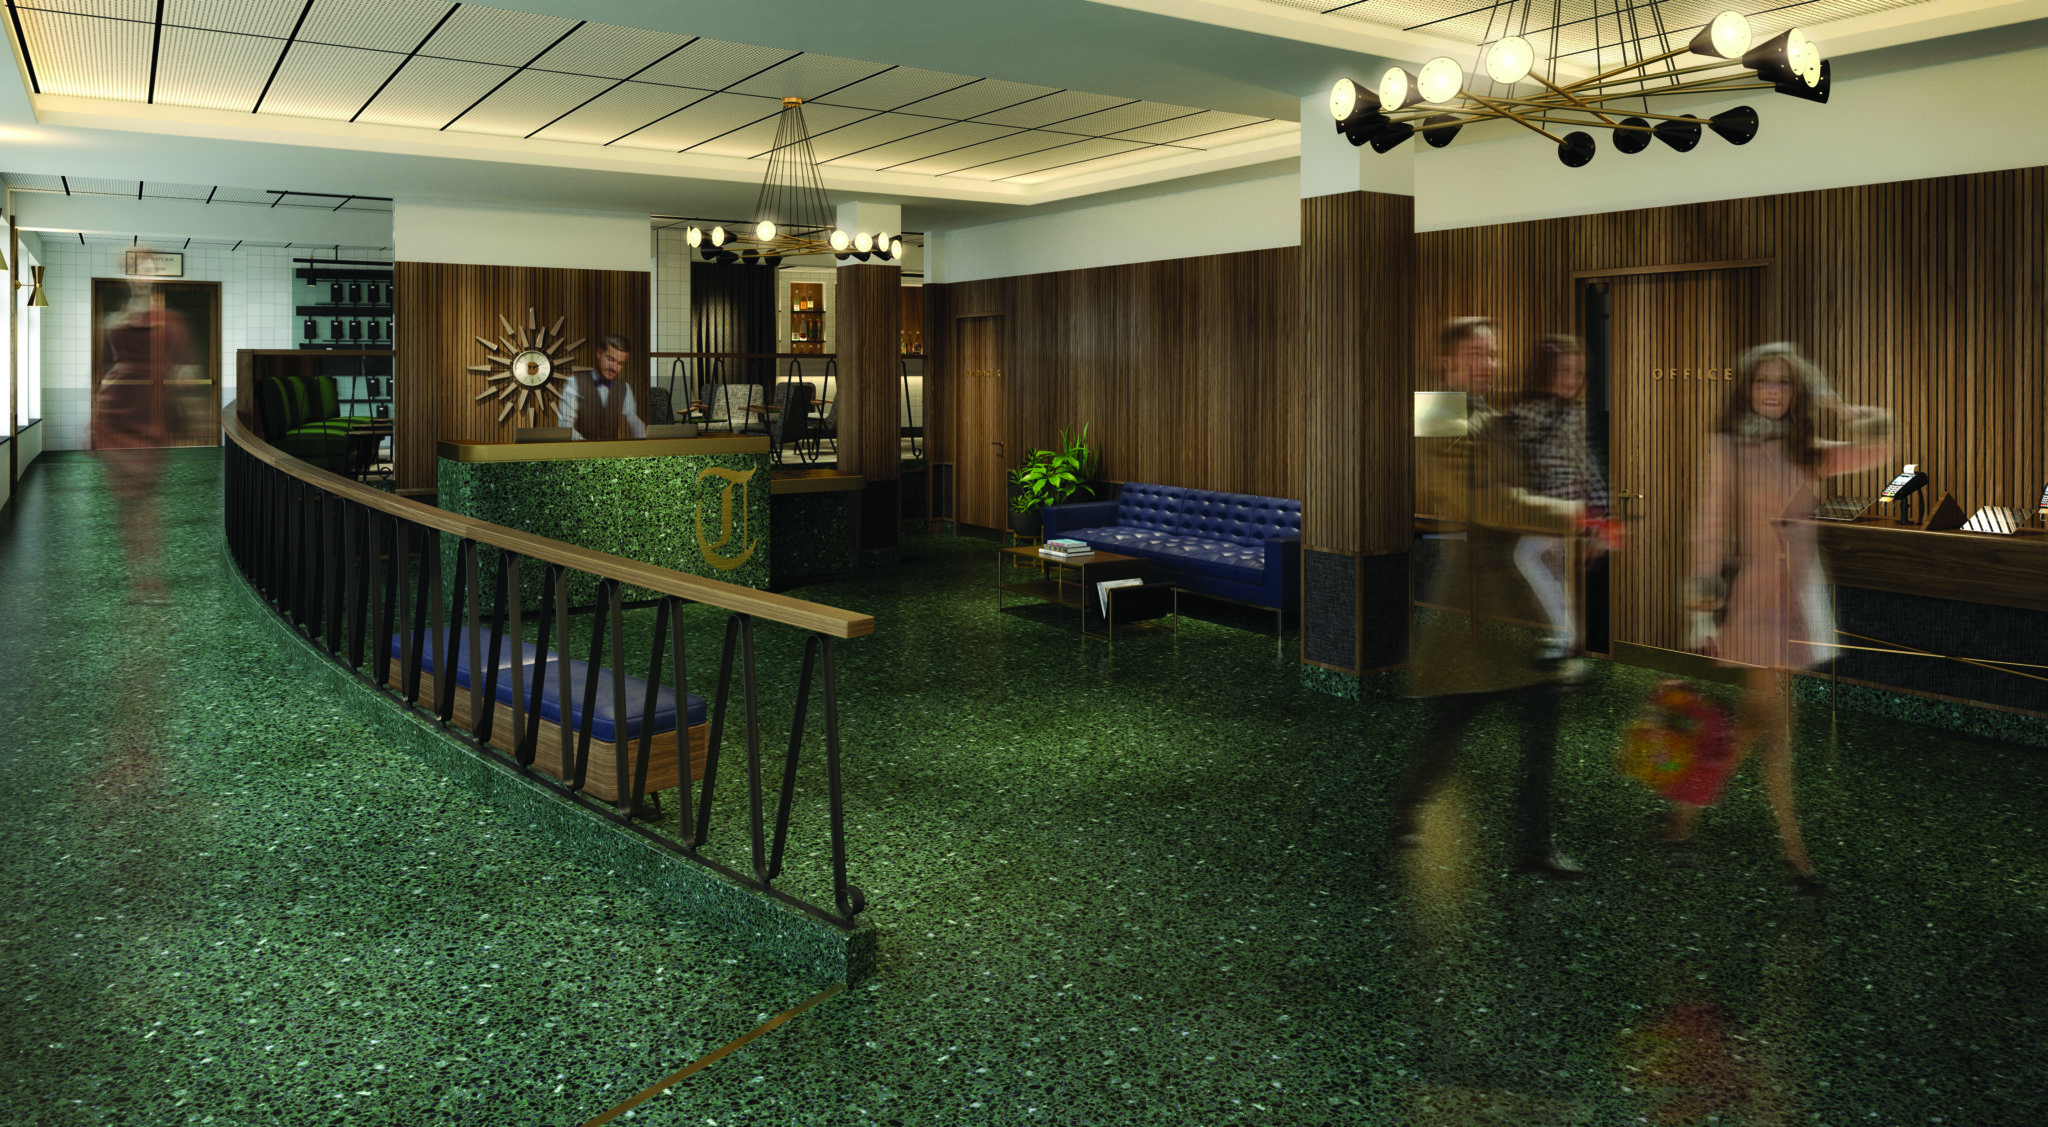 Reception area with a green floor, wooden walls and a couple walking through.